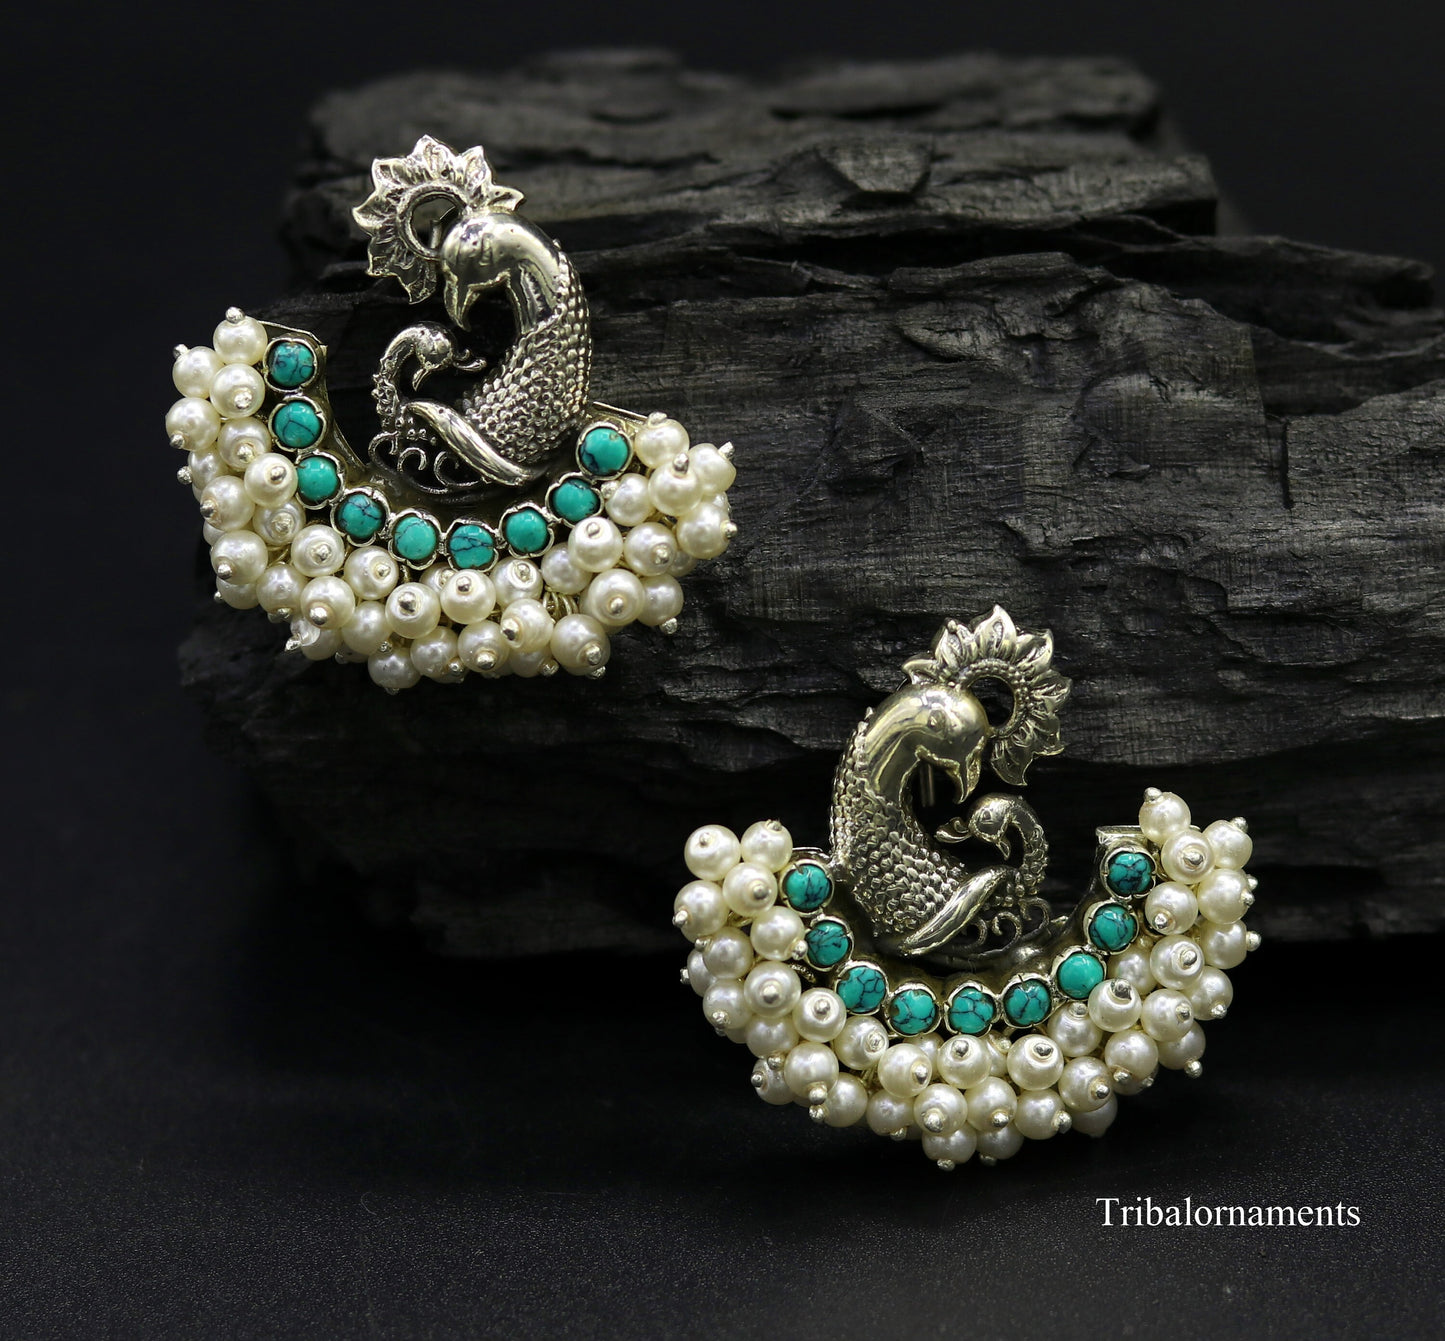 925 sterling silver handmade gorgeous peacock design stud earring with gorgeous turquoise and pearl customized earring tribal jewelry s858 - TRIBAL ORNAMENTS